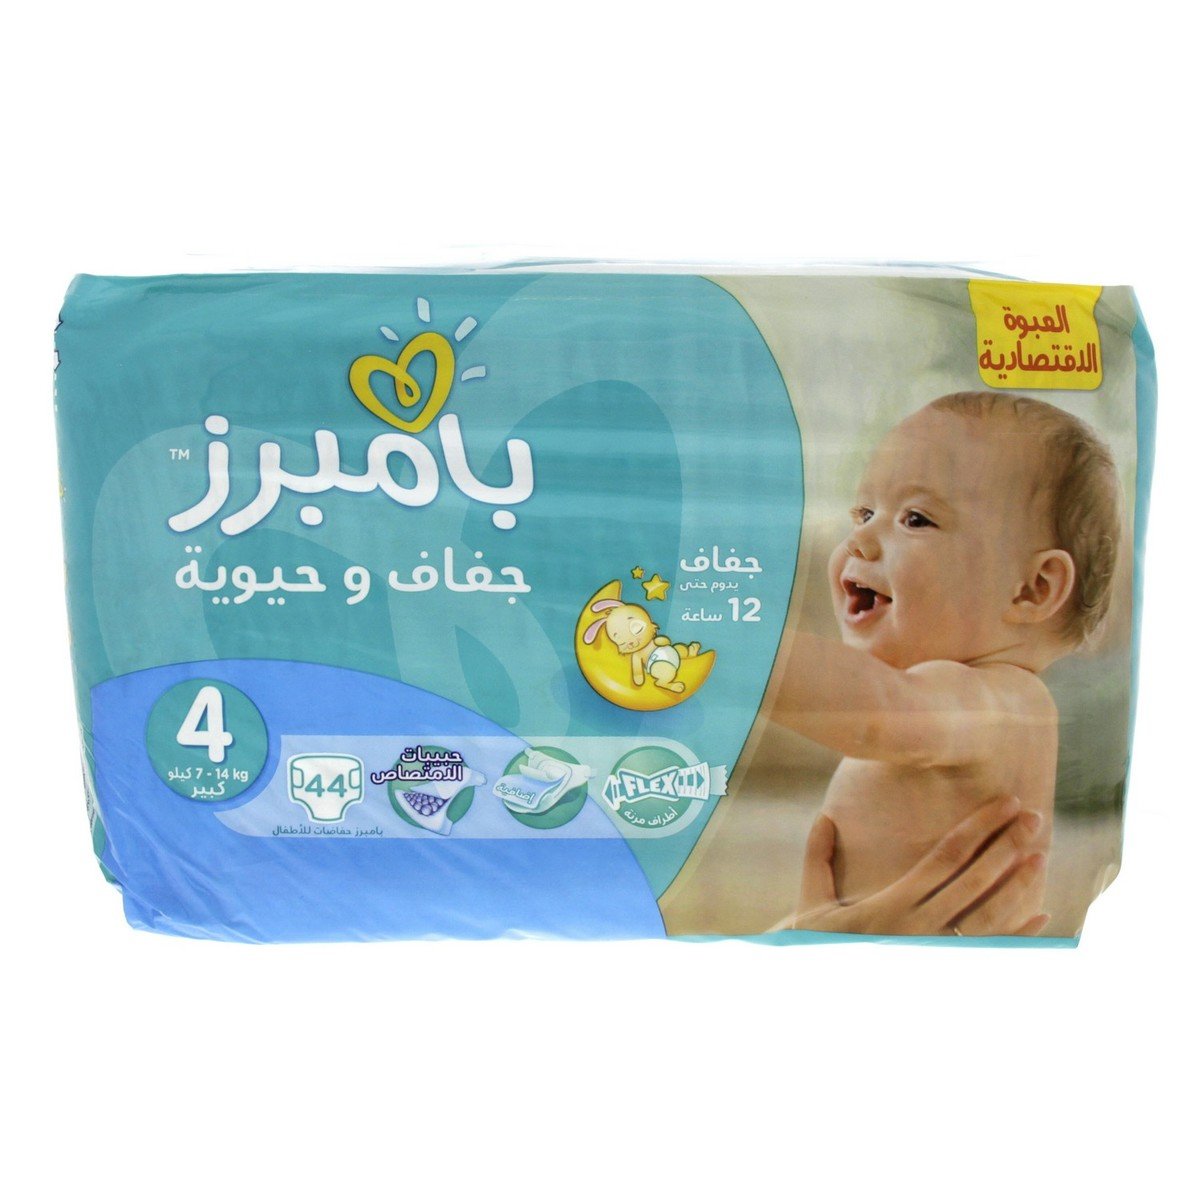 Pampers Active Baby-Dry, Size 4, Large, 7-14kg, Value Pack, 44 Count x 2pcs